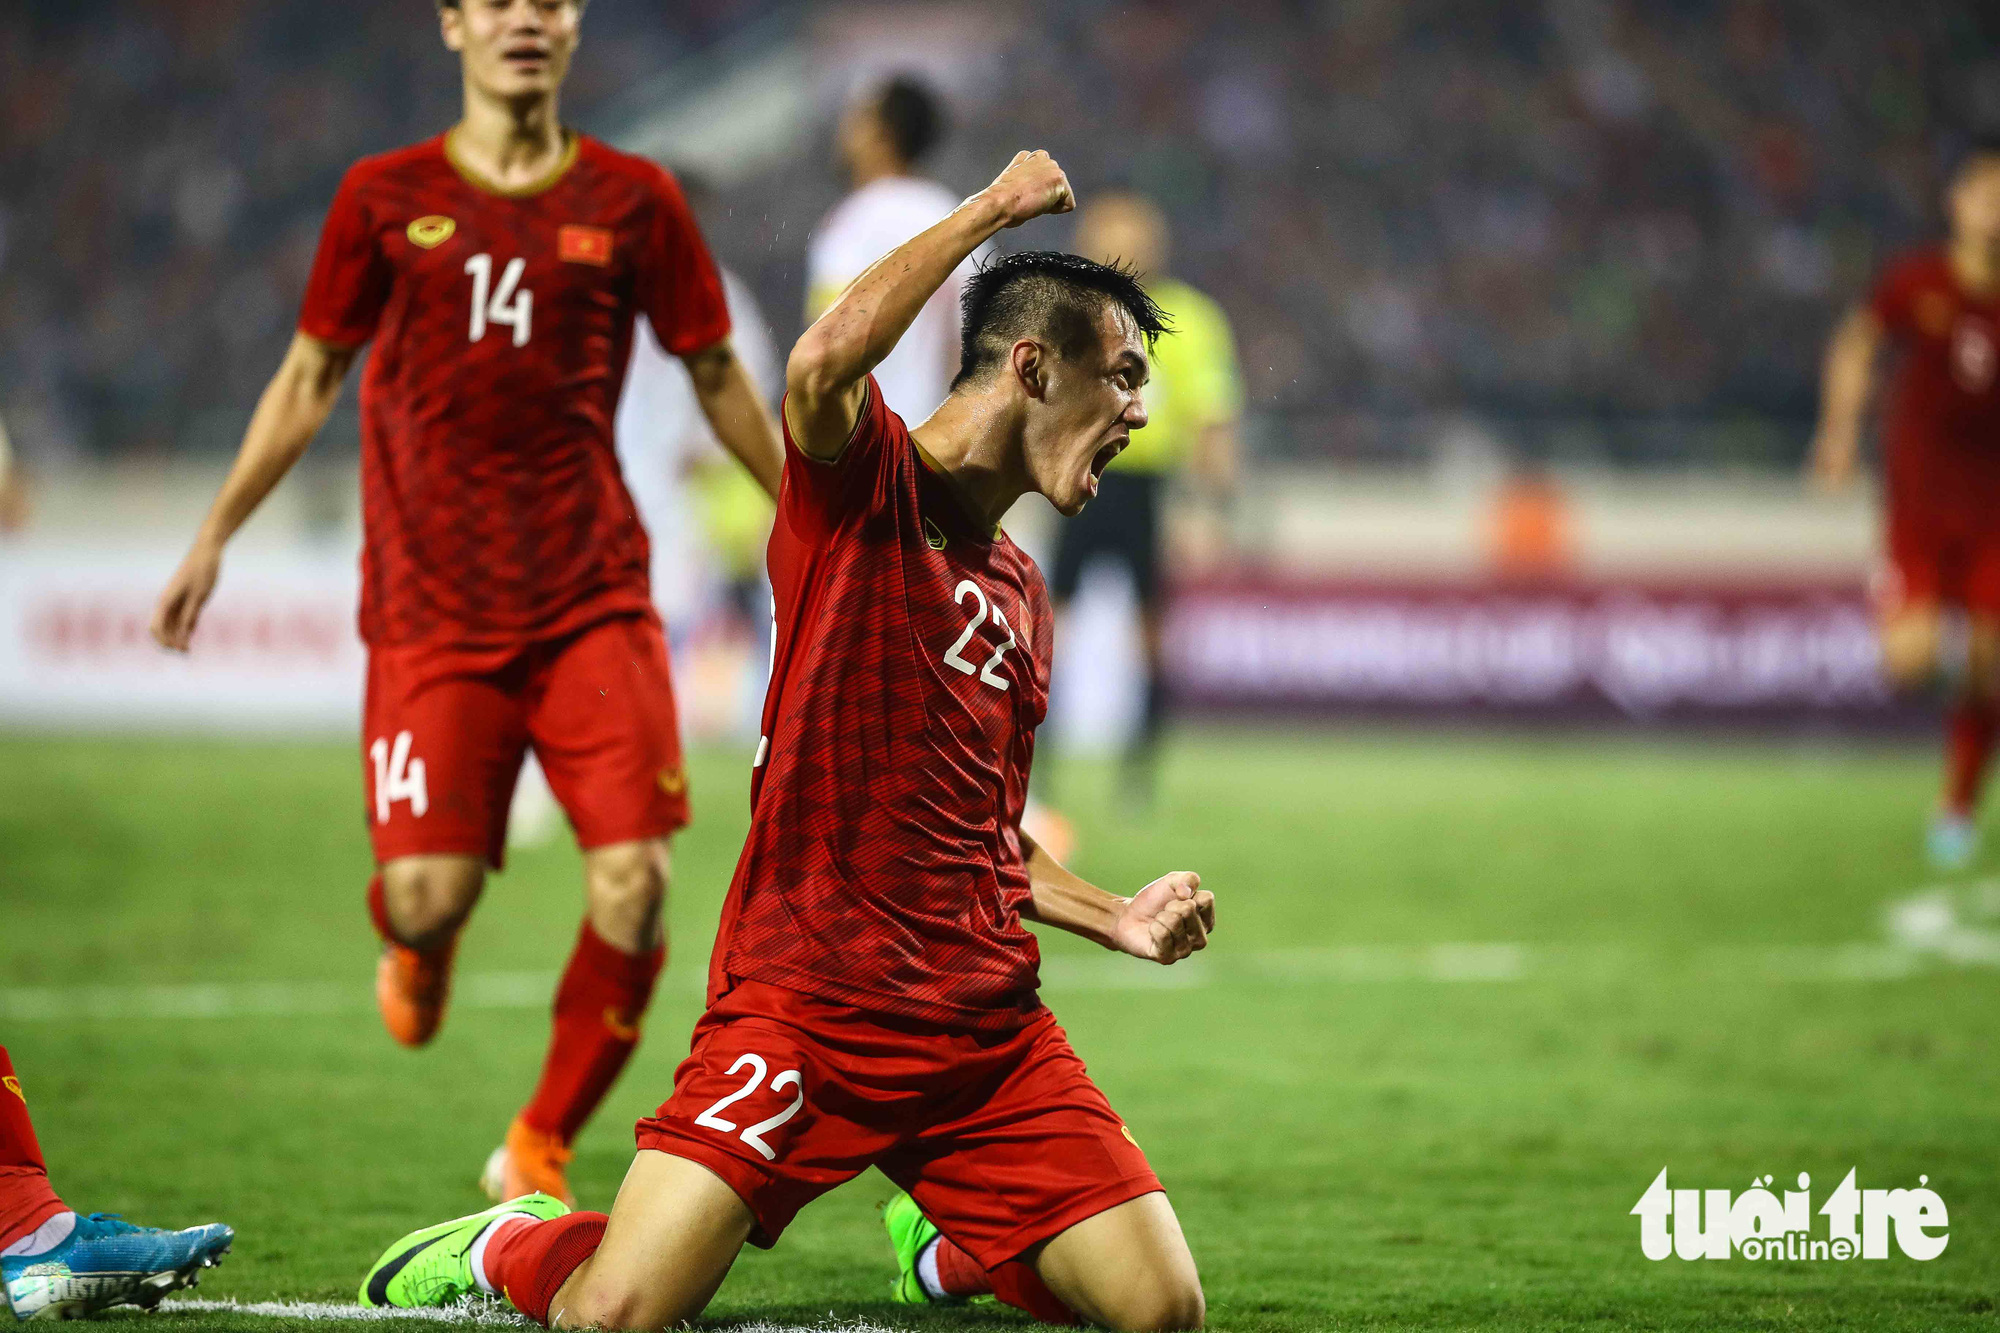 Value of Vietnam’s football squad surges to $4mn amid COVID-19: Transfermarkt